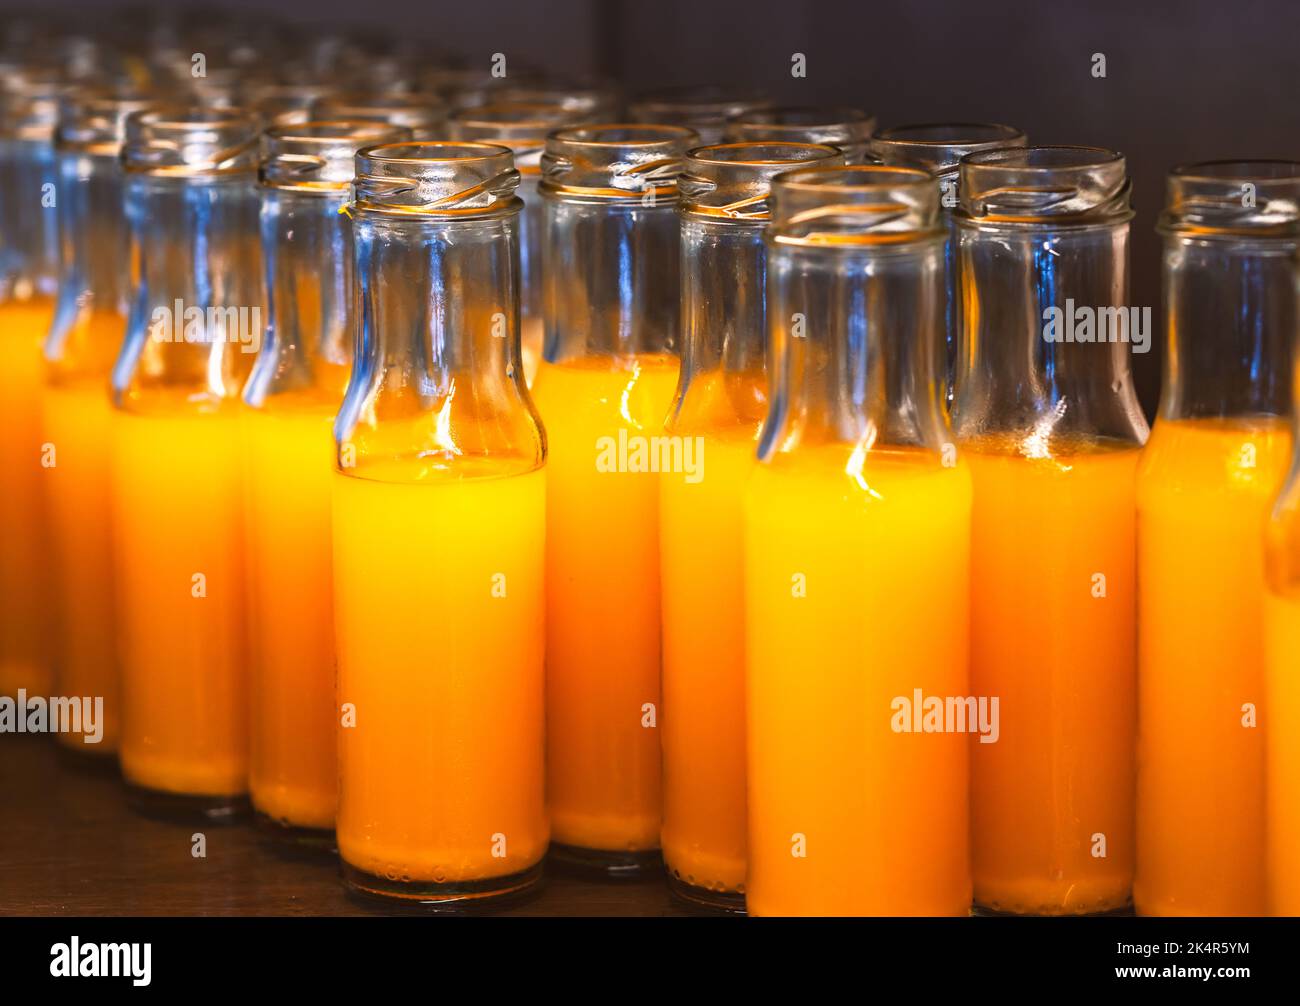 Juice In Small Clear Glass Bottles Stock Photo - Download Image